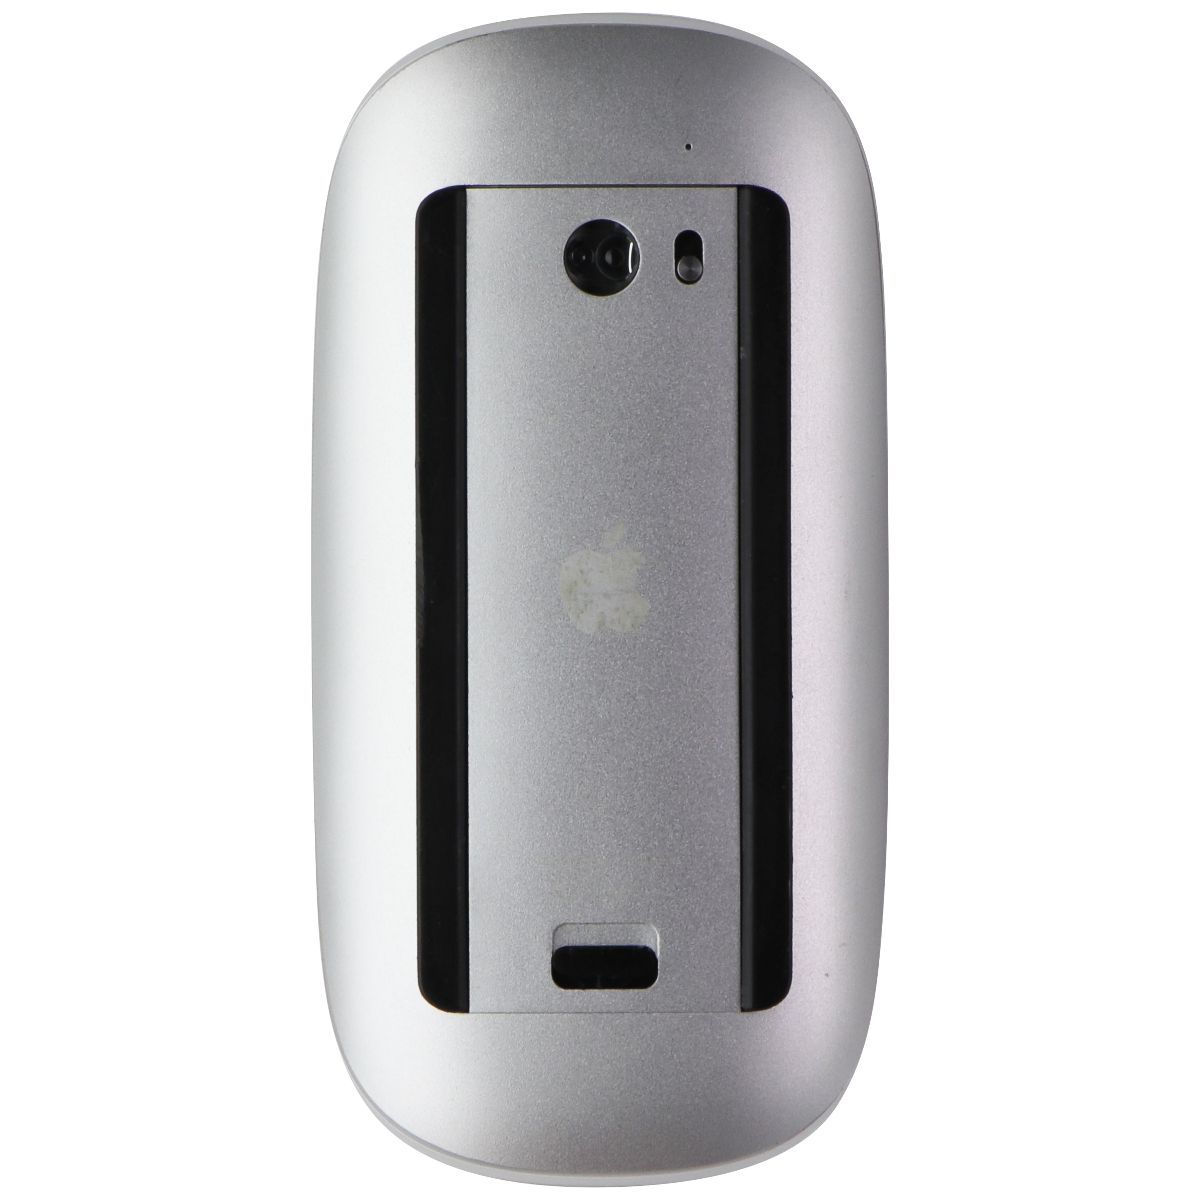 Apple OEM Original (A1296) Bluetooth Magic Mouse (Battery Operated) - White Keyboards/Mice - Mice, Trackballs & Touchpads Apple    - Simple Cell Bulk Wholesale Pricing - USA Seller